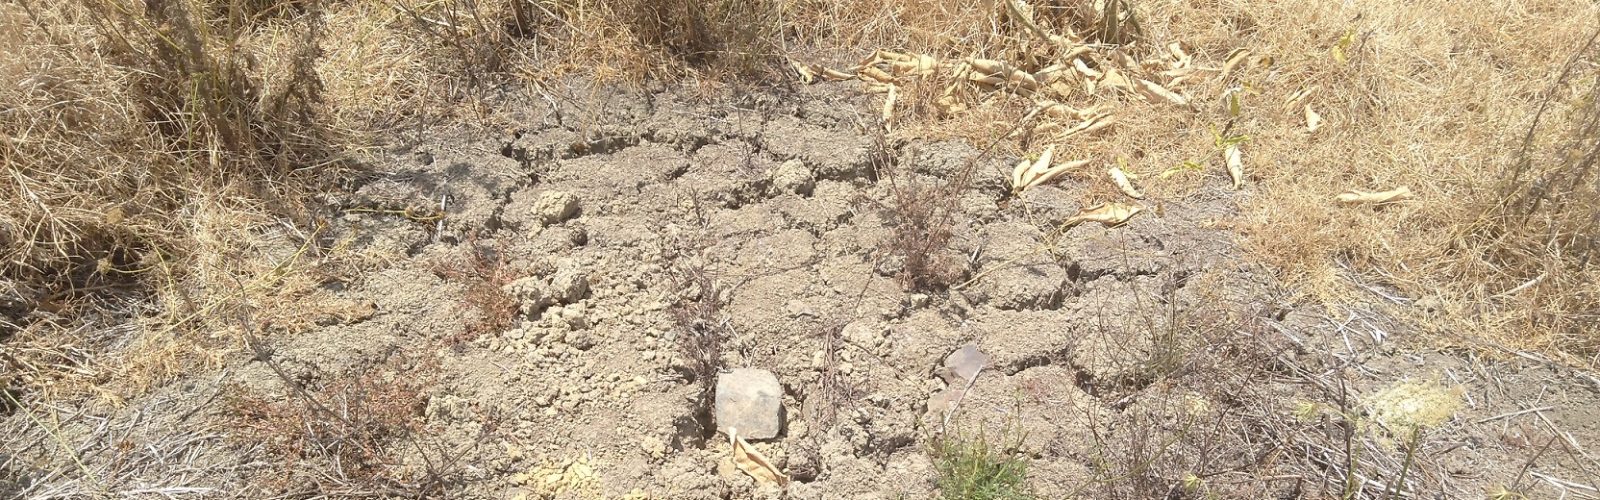 Soil shrinkage becoming a focus - Header Image